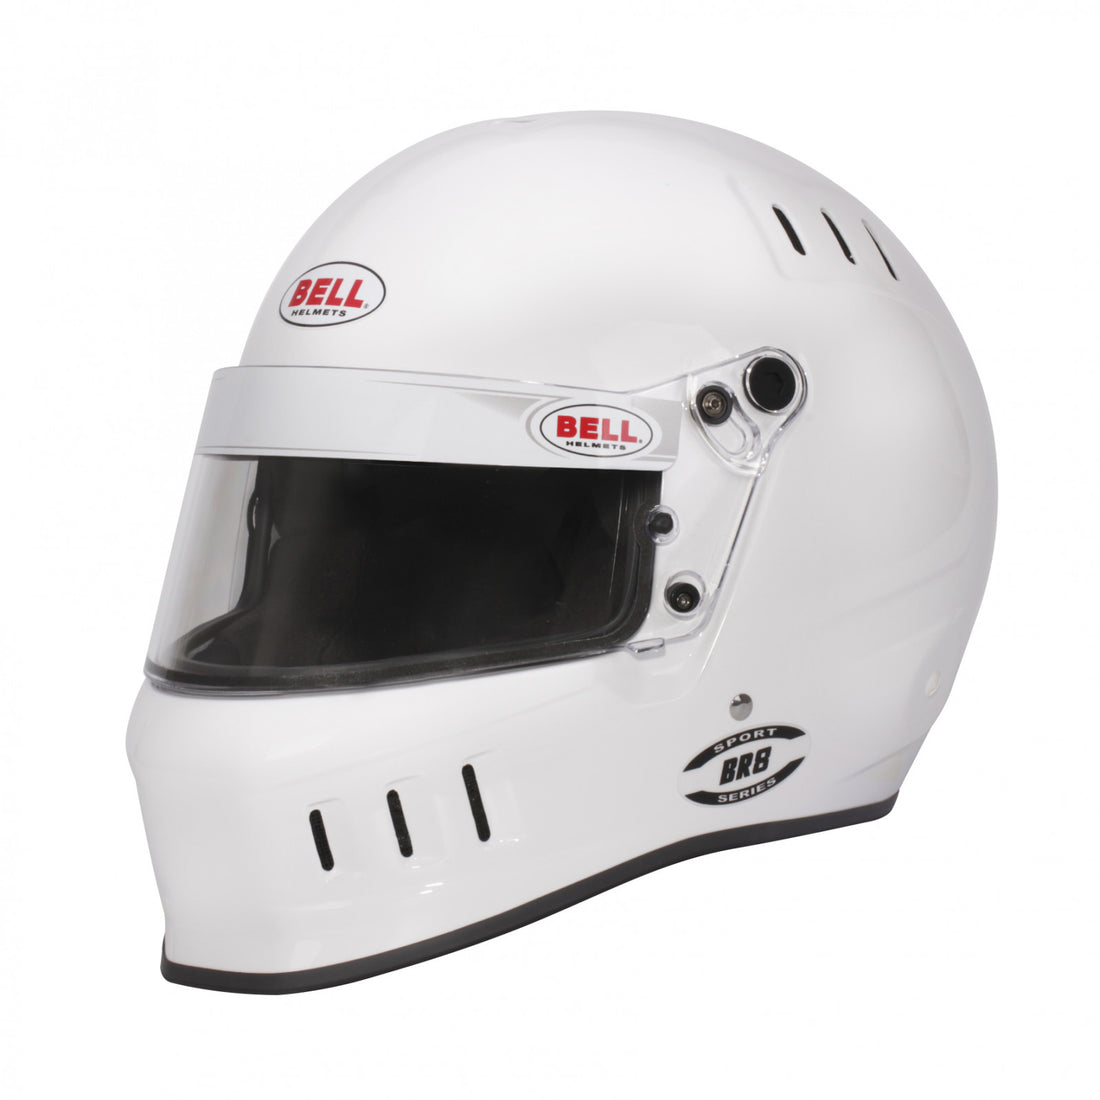 Bell BR8 White Helmet Size Extra Large